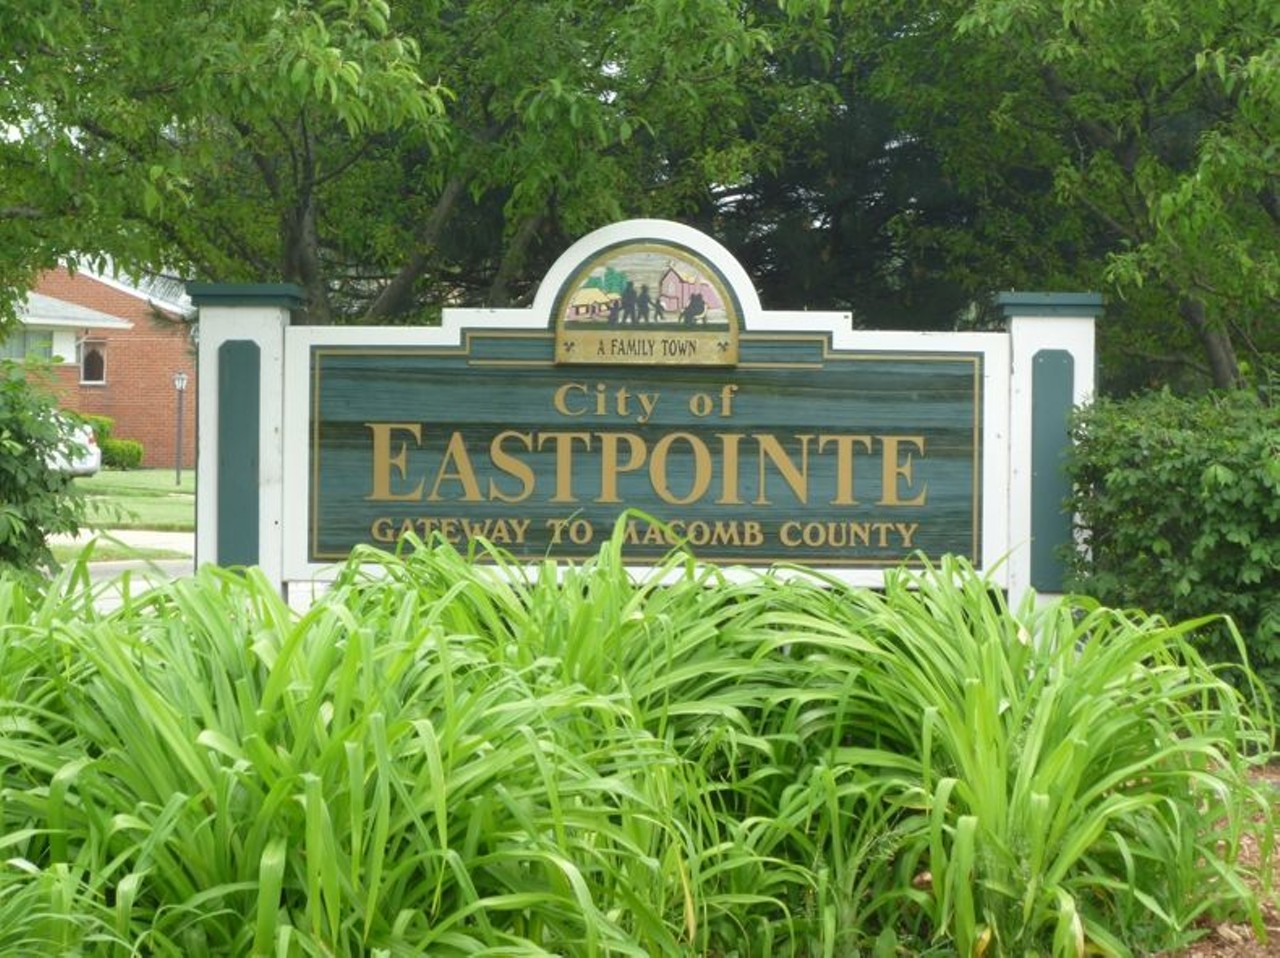 15: Eastpointe: The Gateway to Macomb County
Poor Macomb County: In many ways, it&#146;s exactly the sort of land of seven-lane intersections and suburban generica writers like James Howard Kunstler have made a career of criticizing. What does it portend that Eastpointe, hit so hard by the foreclosure crisis, champions its role as Macomb&#146;s anteroom?